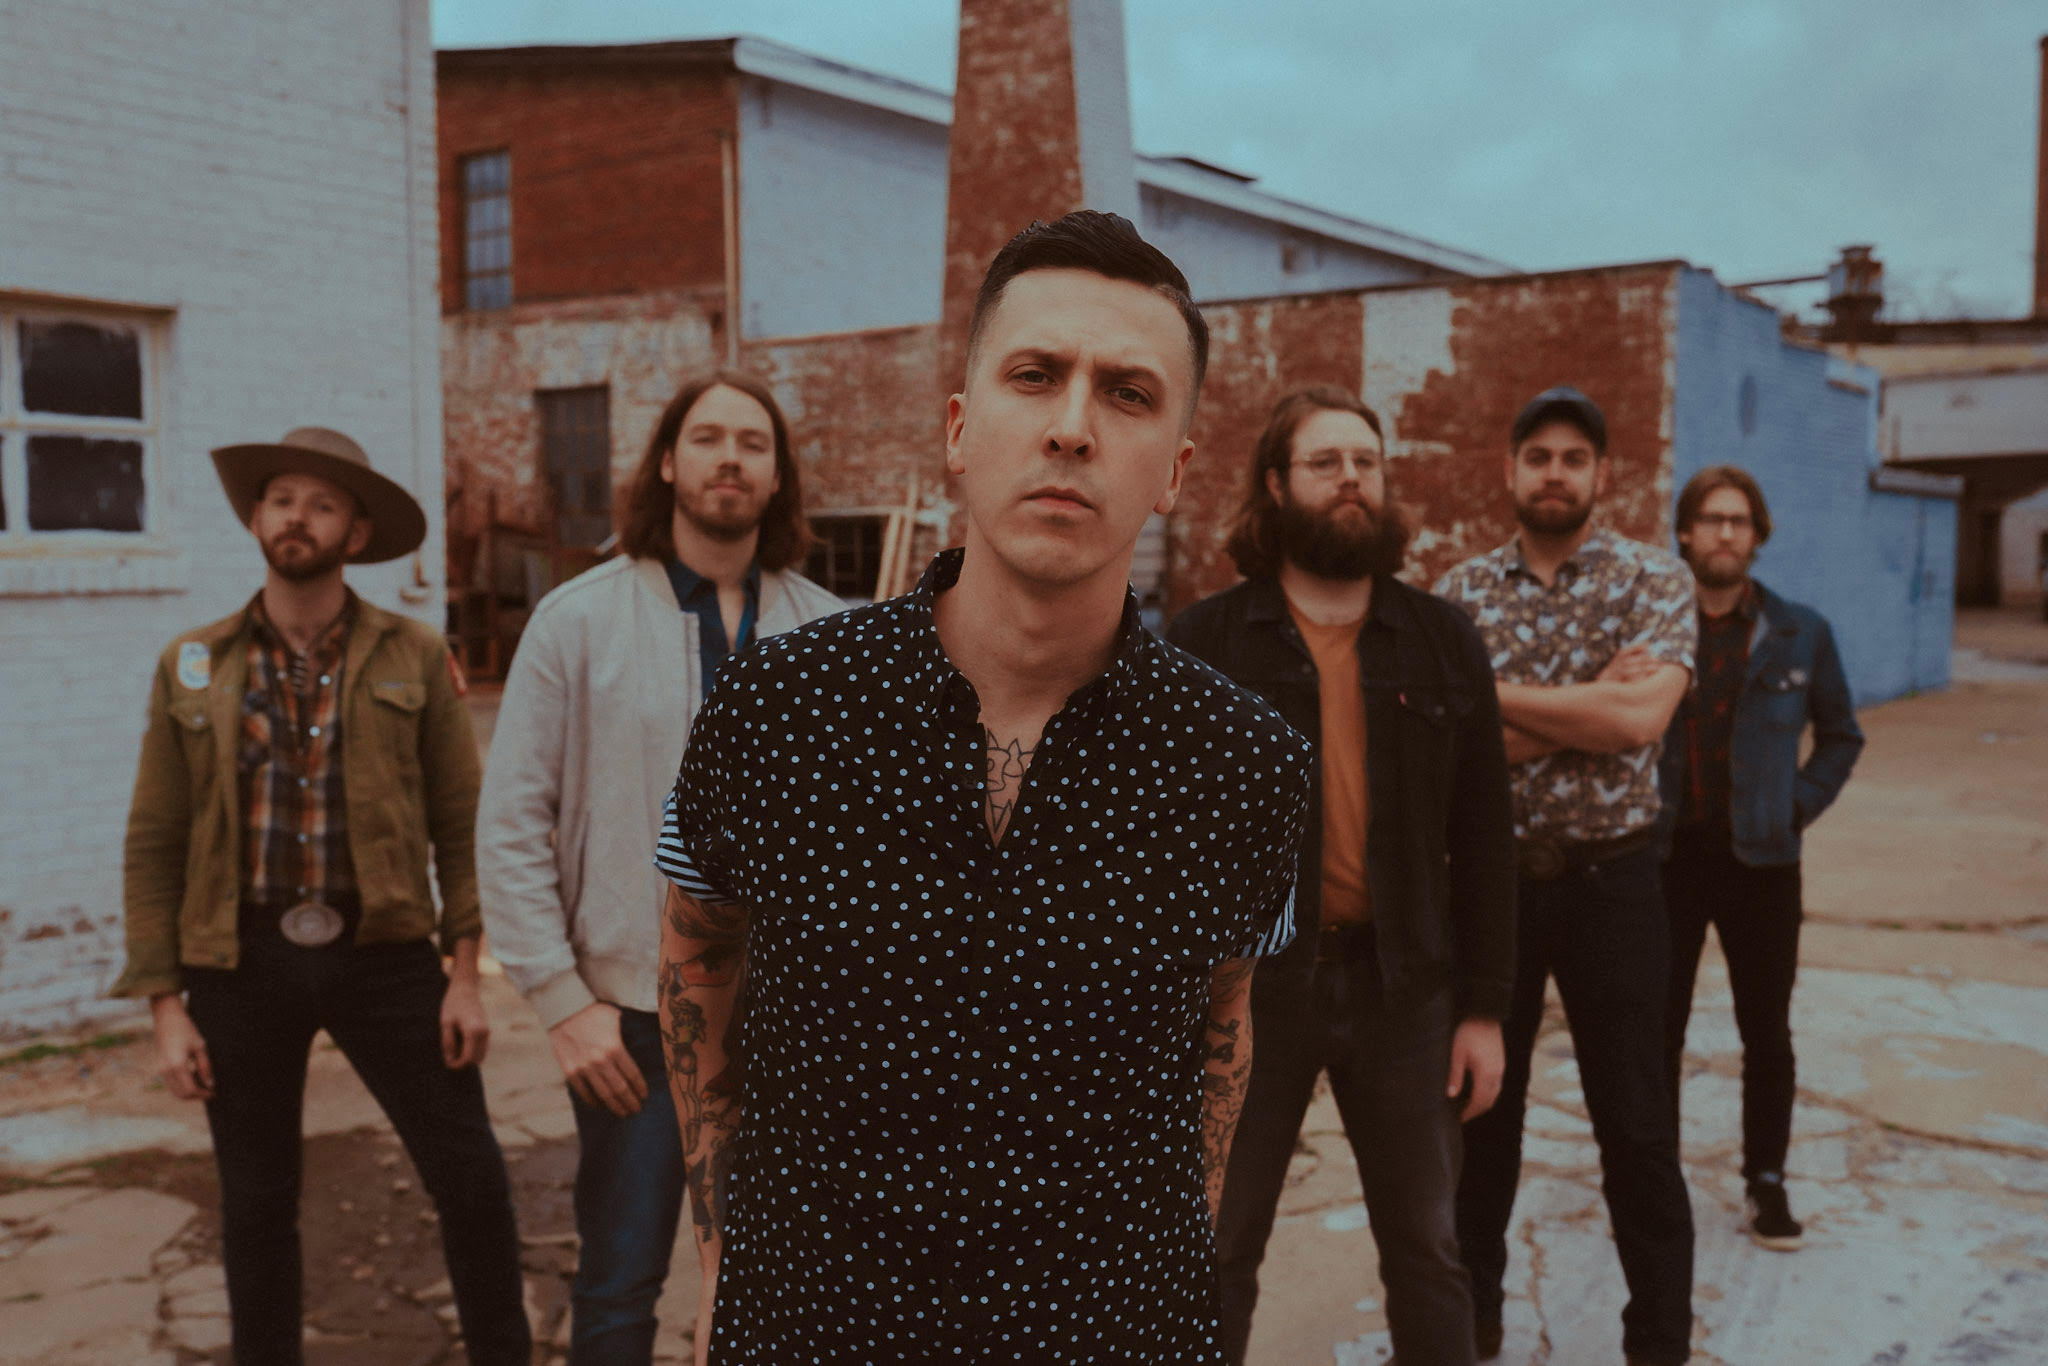 American Aquarium Reflects on Accountability with “Six Years Come September”